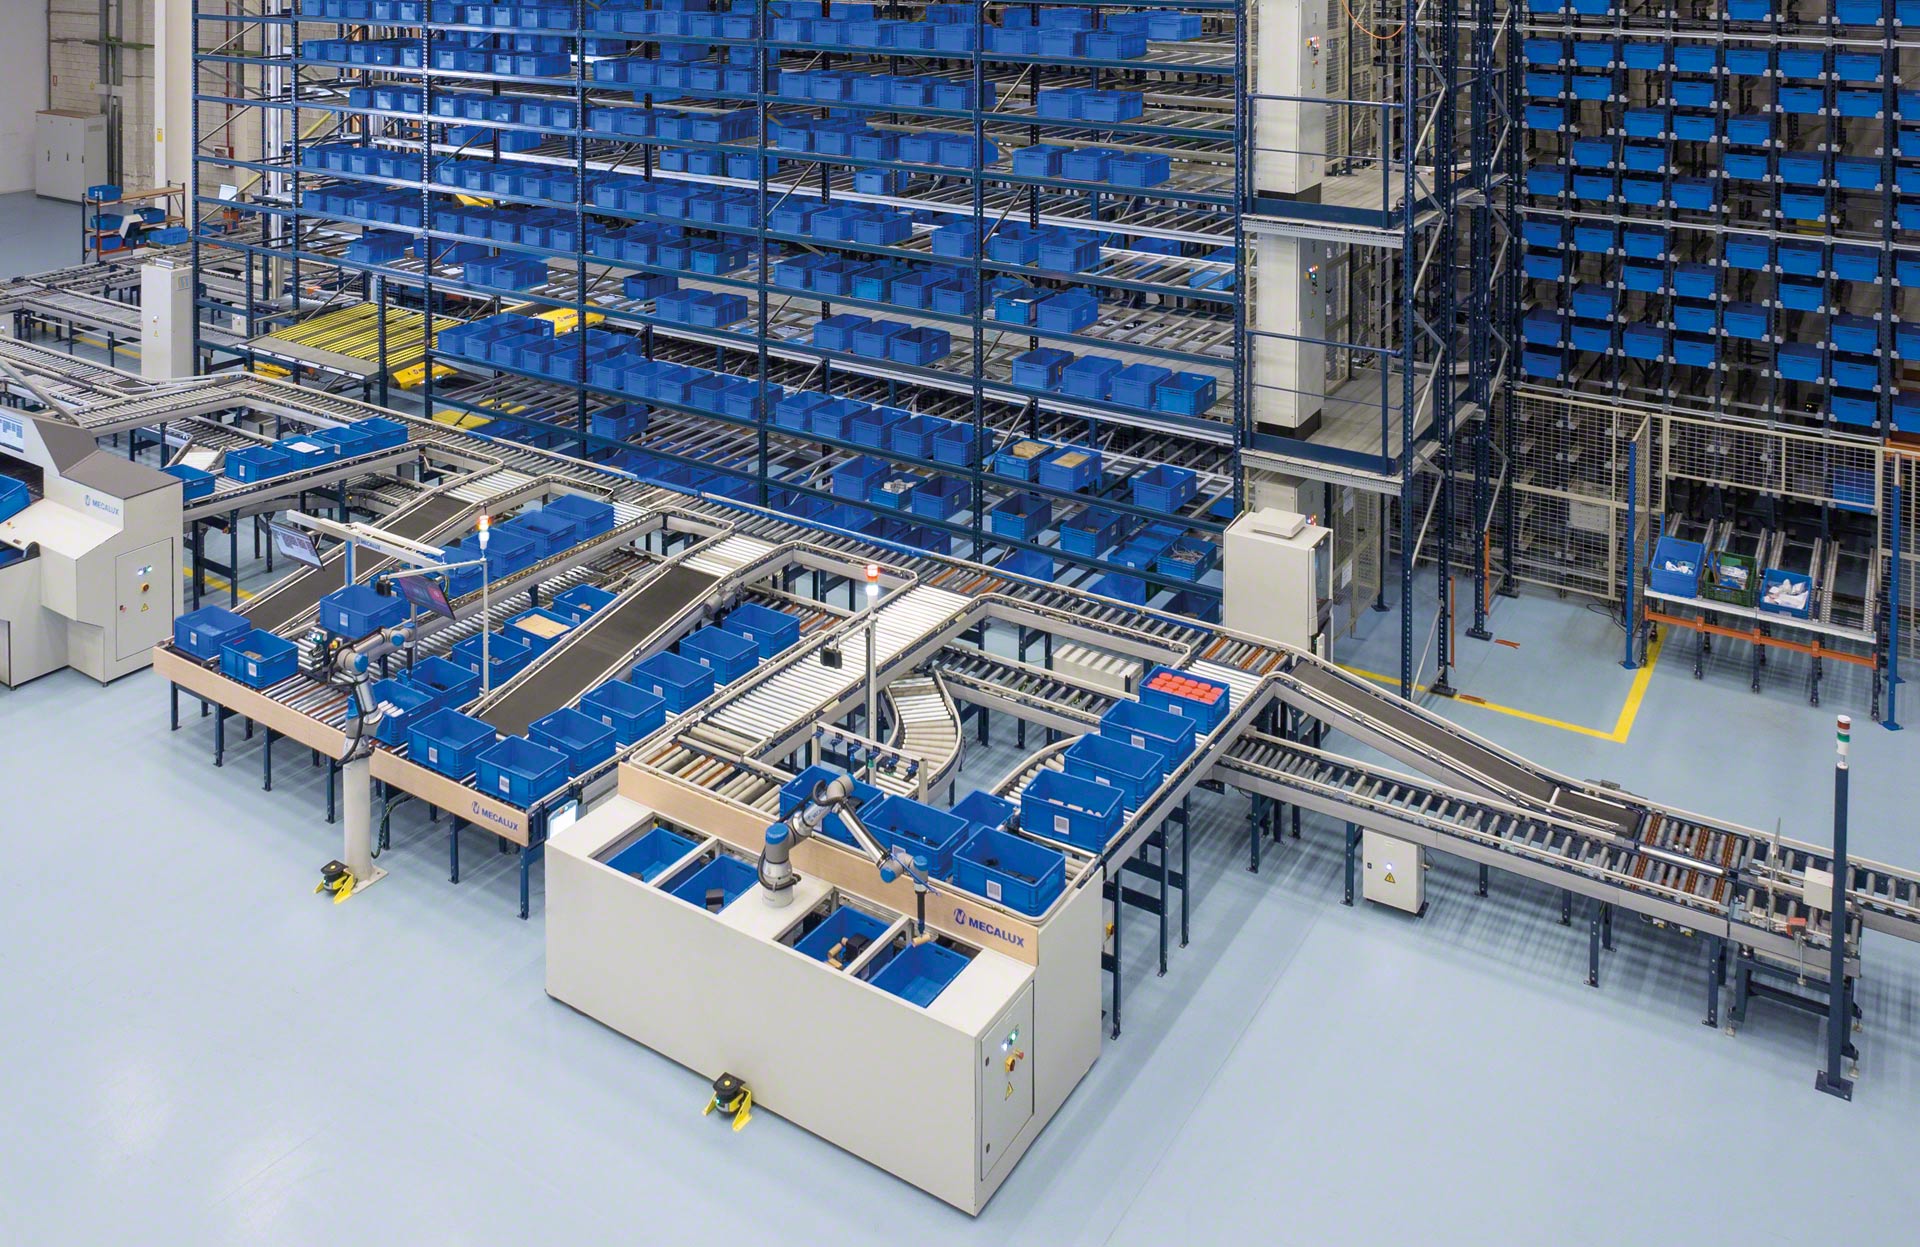 The order picking robot integrates seamlessly with various automated storage systems